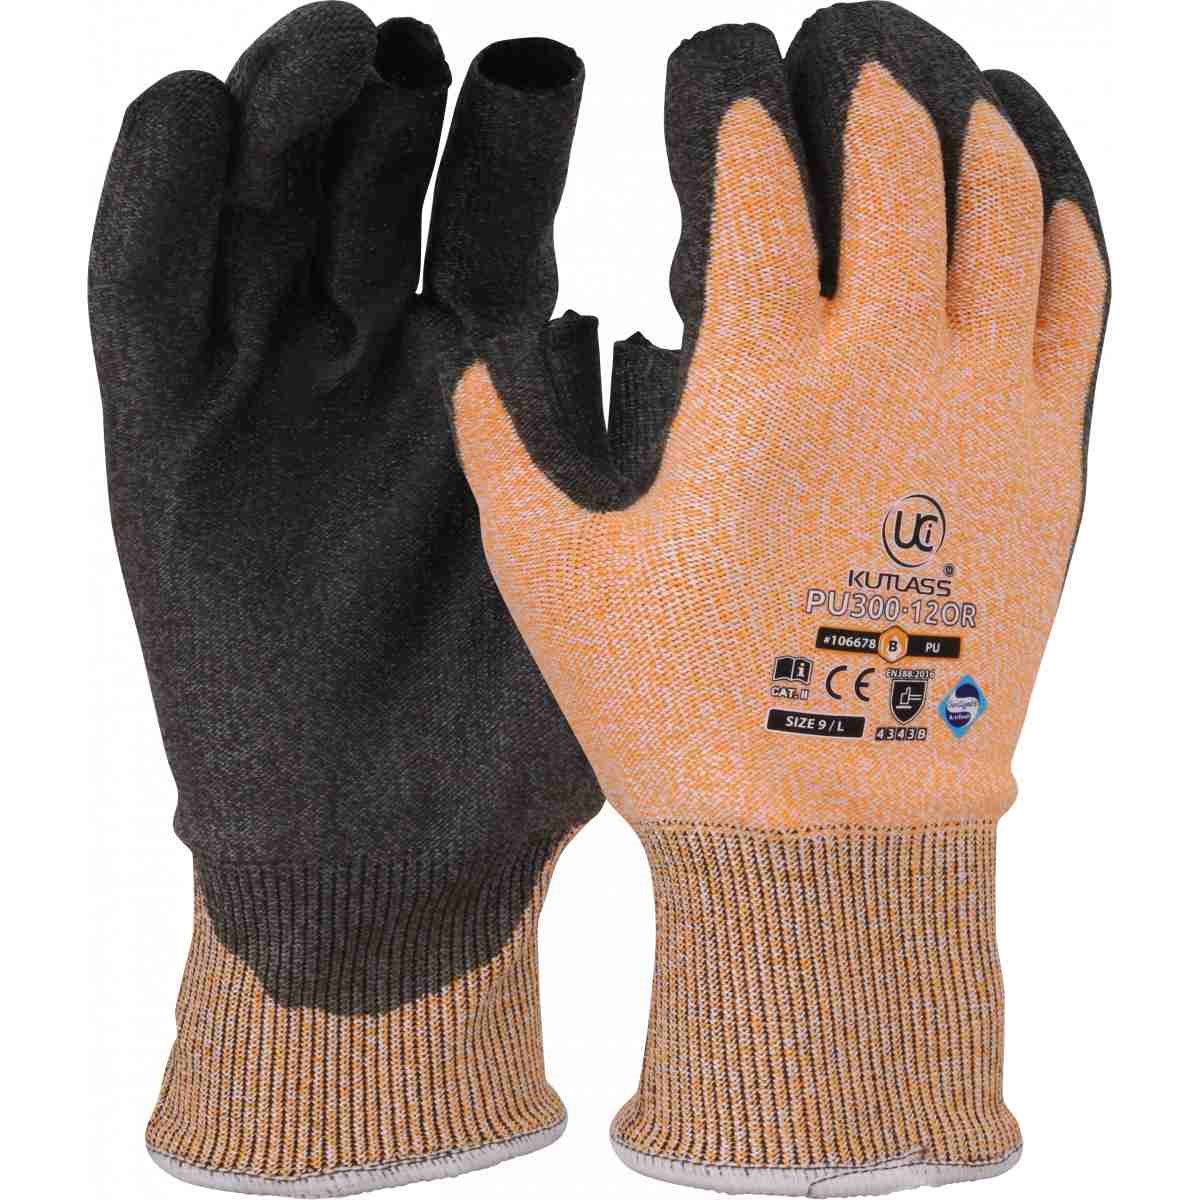 Kutlass PU300 Cut Resistant Gloves PU Palm Coated Safety Gloves Size 7,8,9,10